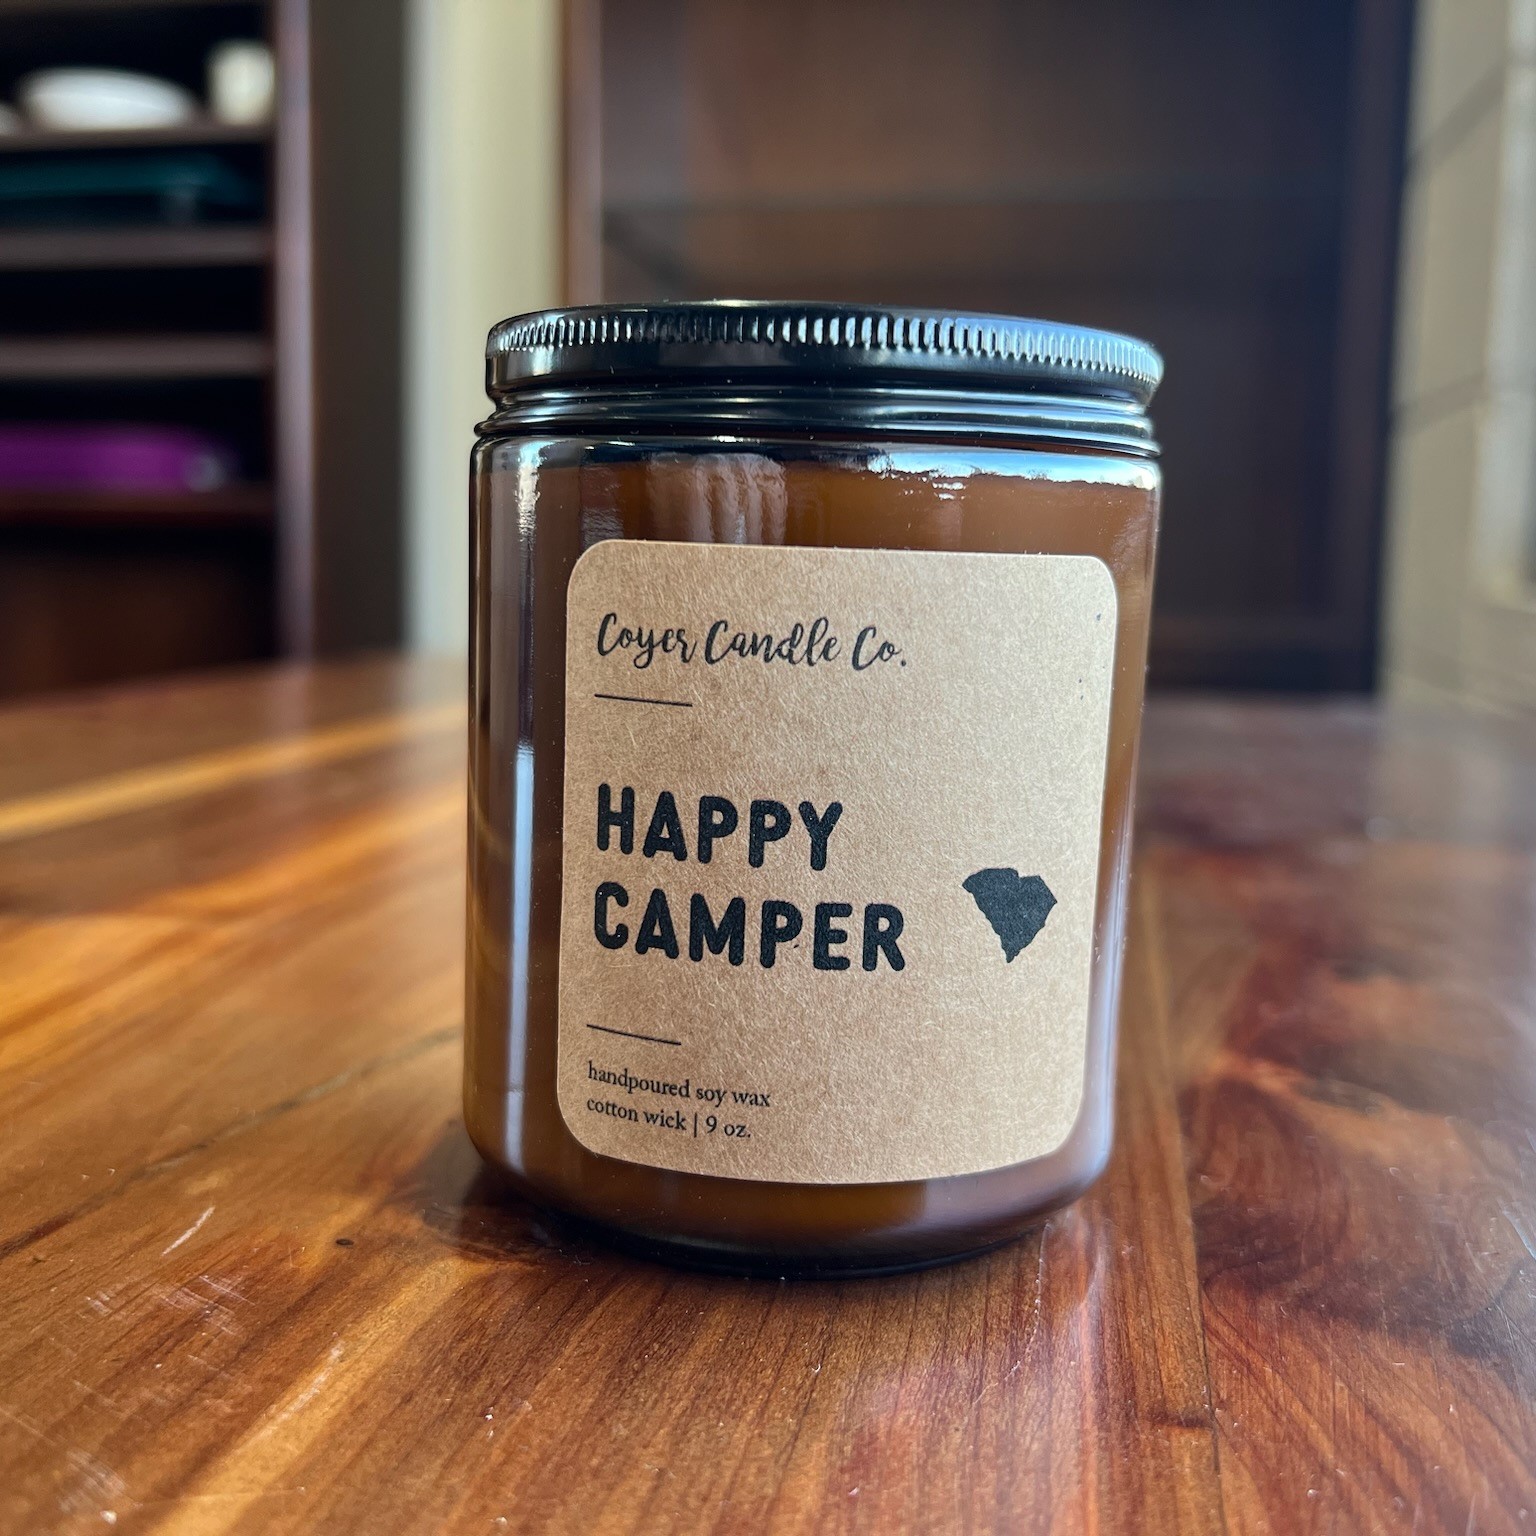 Happy Camper SC Candle Coyer Candle Co